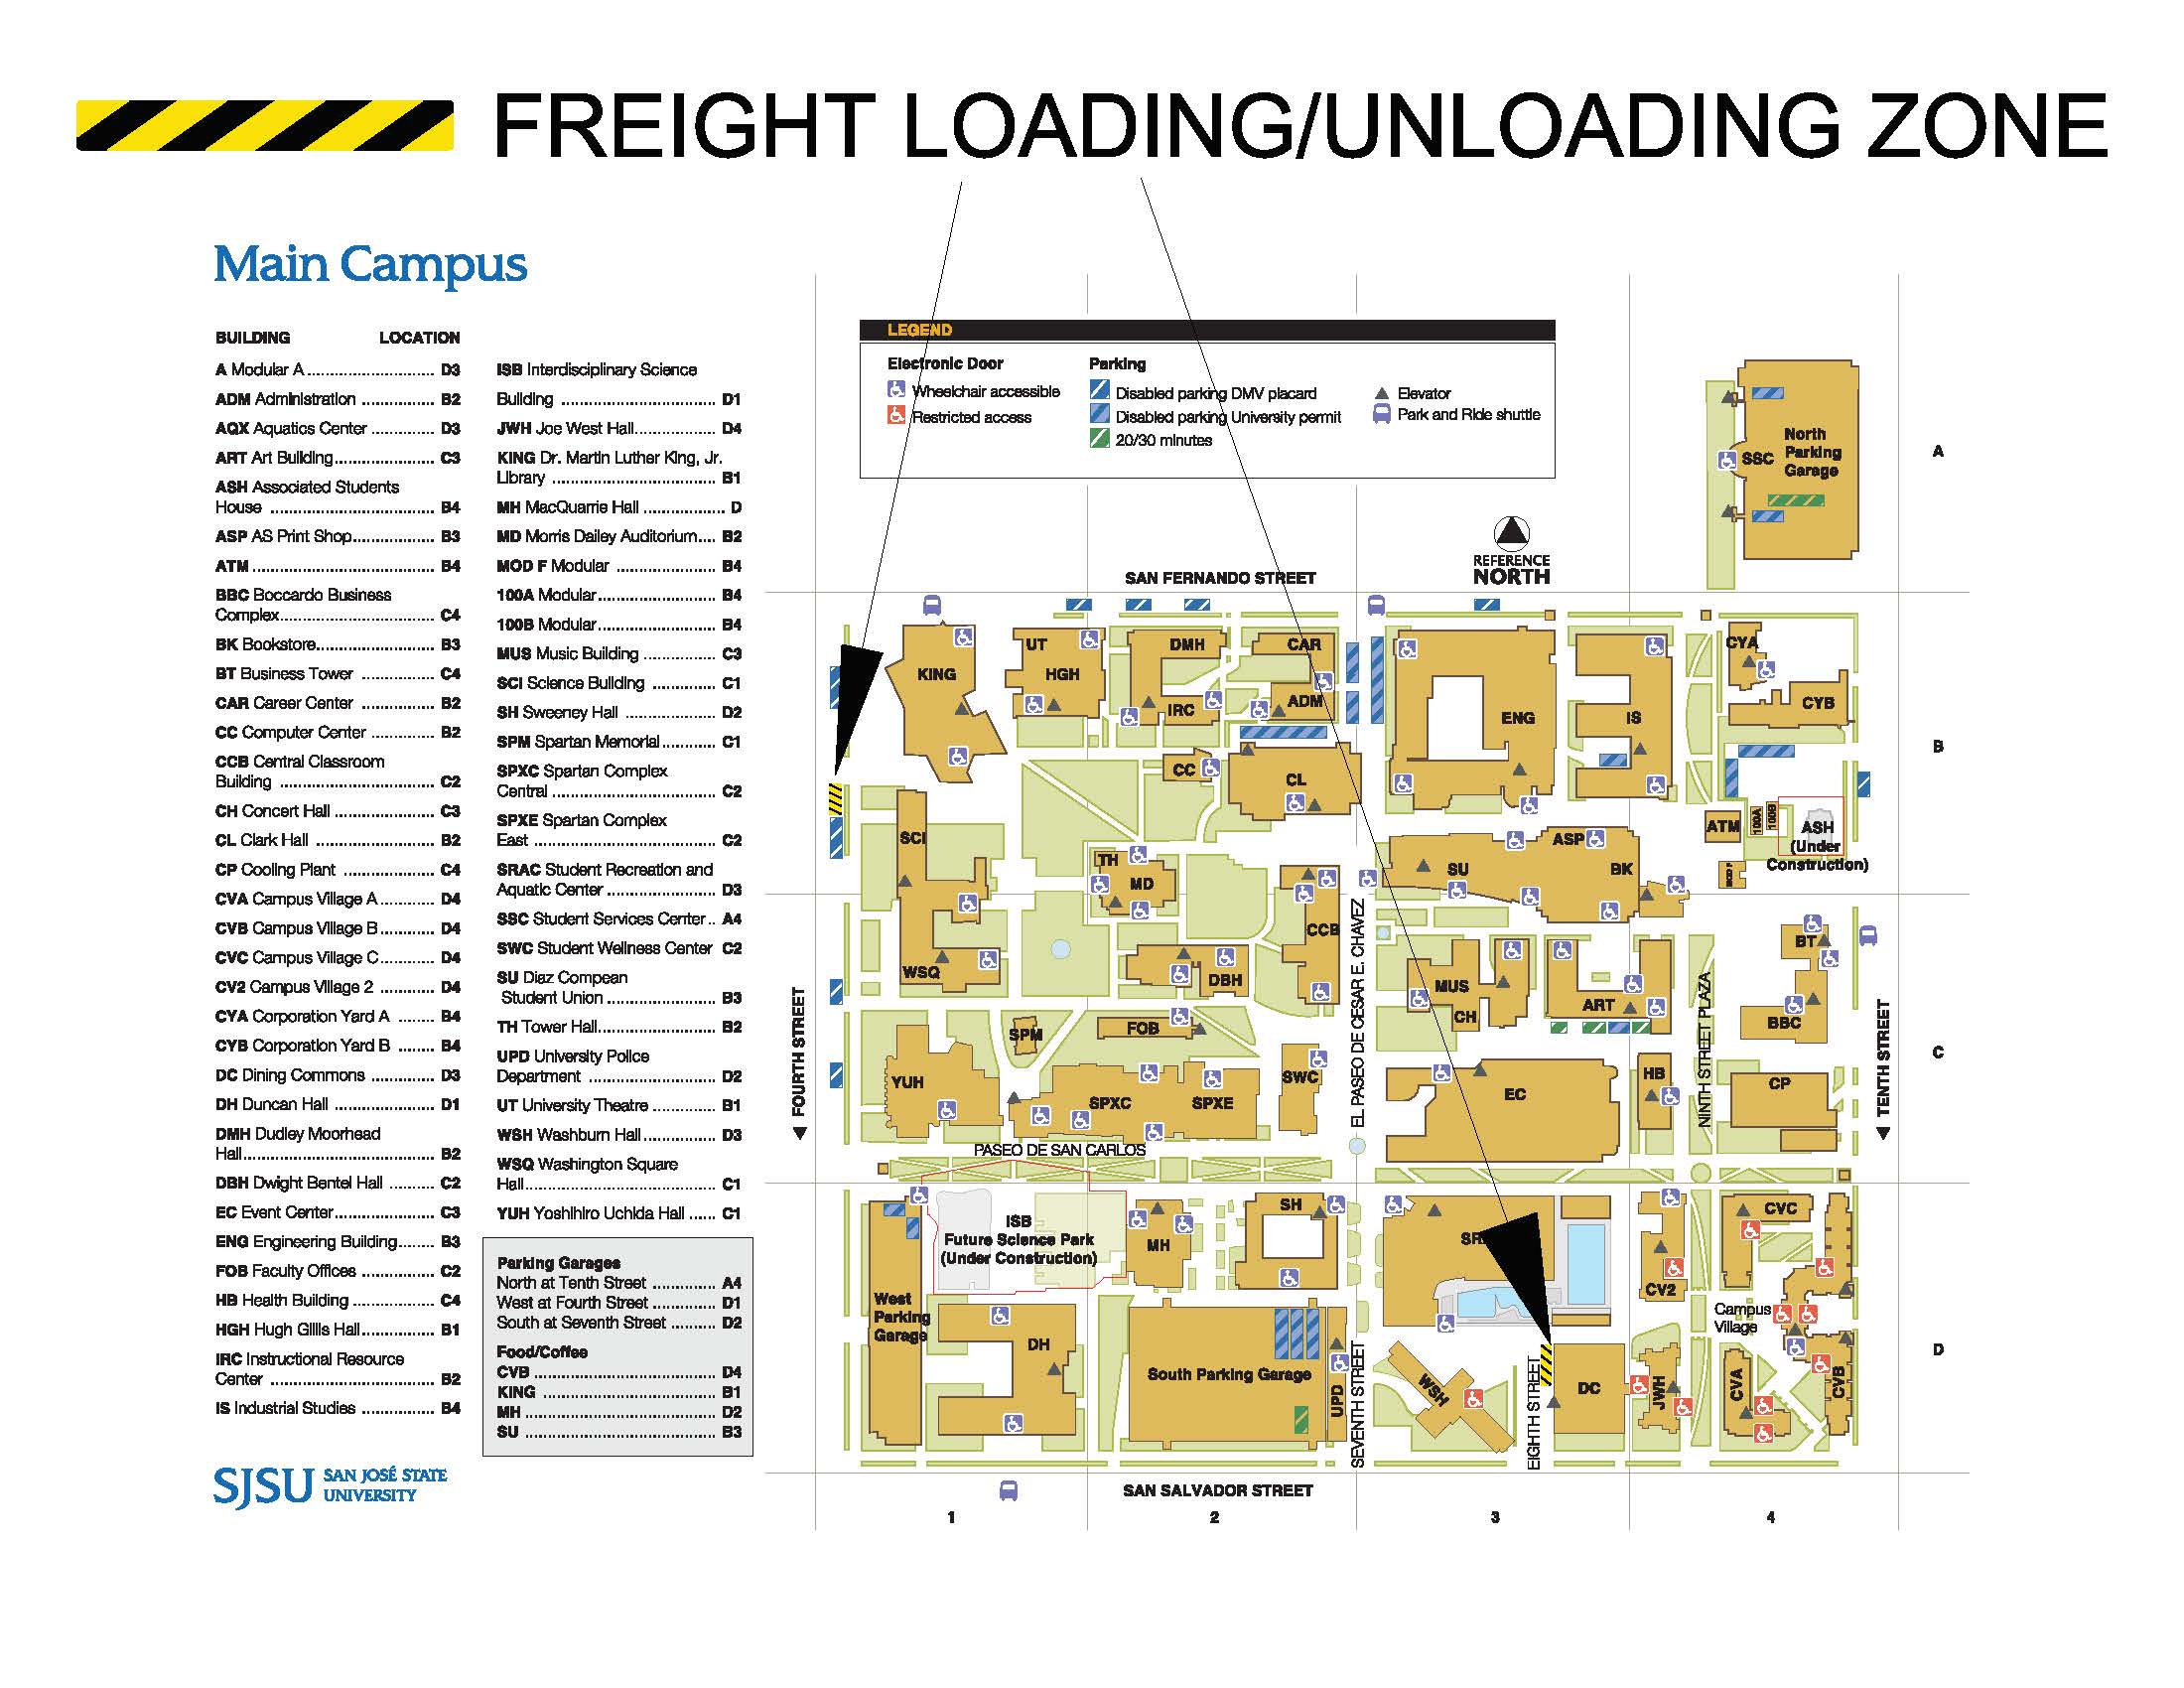 Freight Loading Zones map